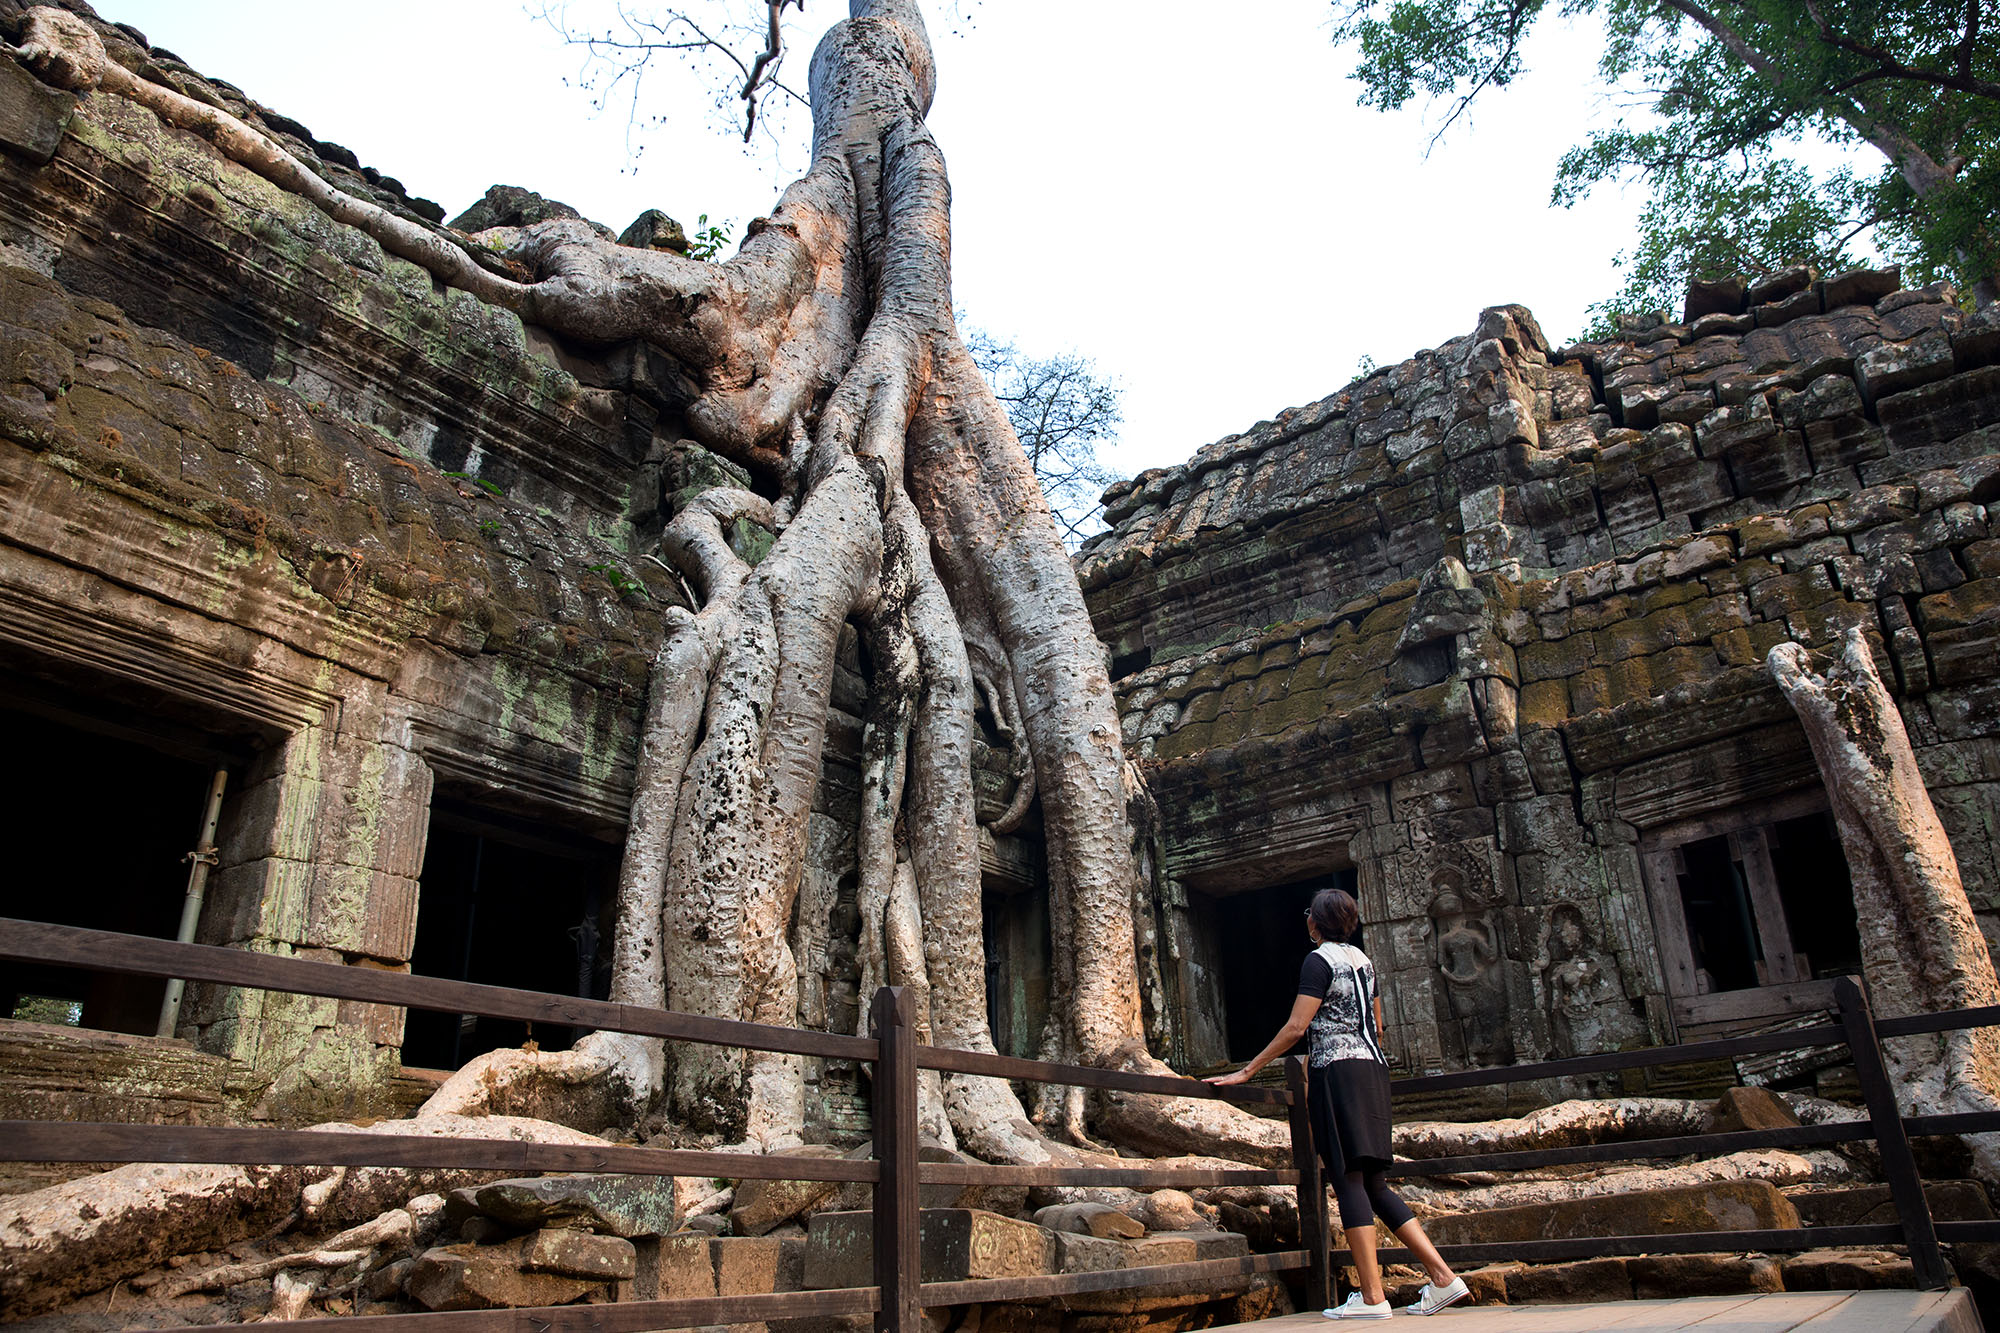 The First Lady visits Ta Phrom temple. (Official White House Photo by Amanda Lucidon)